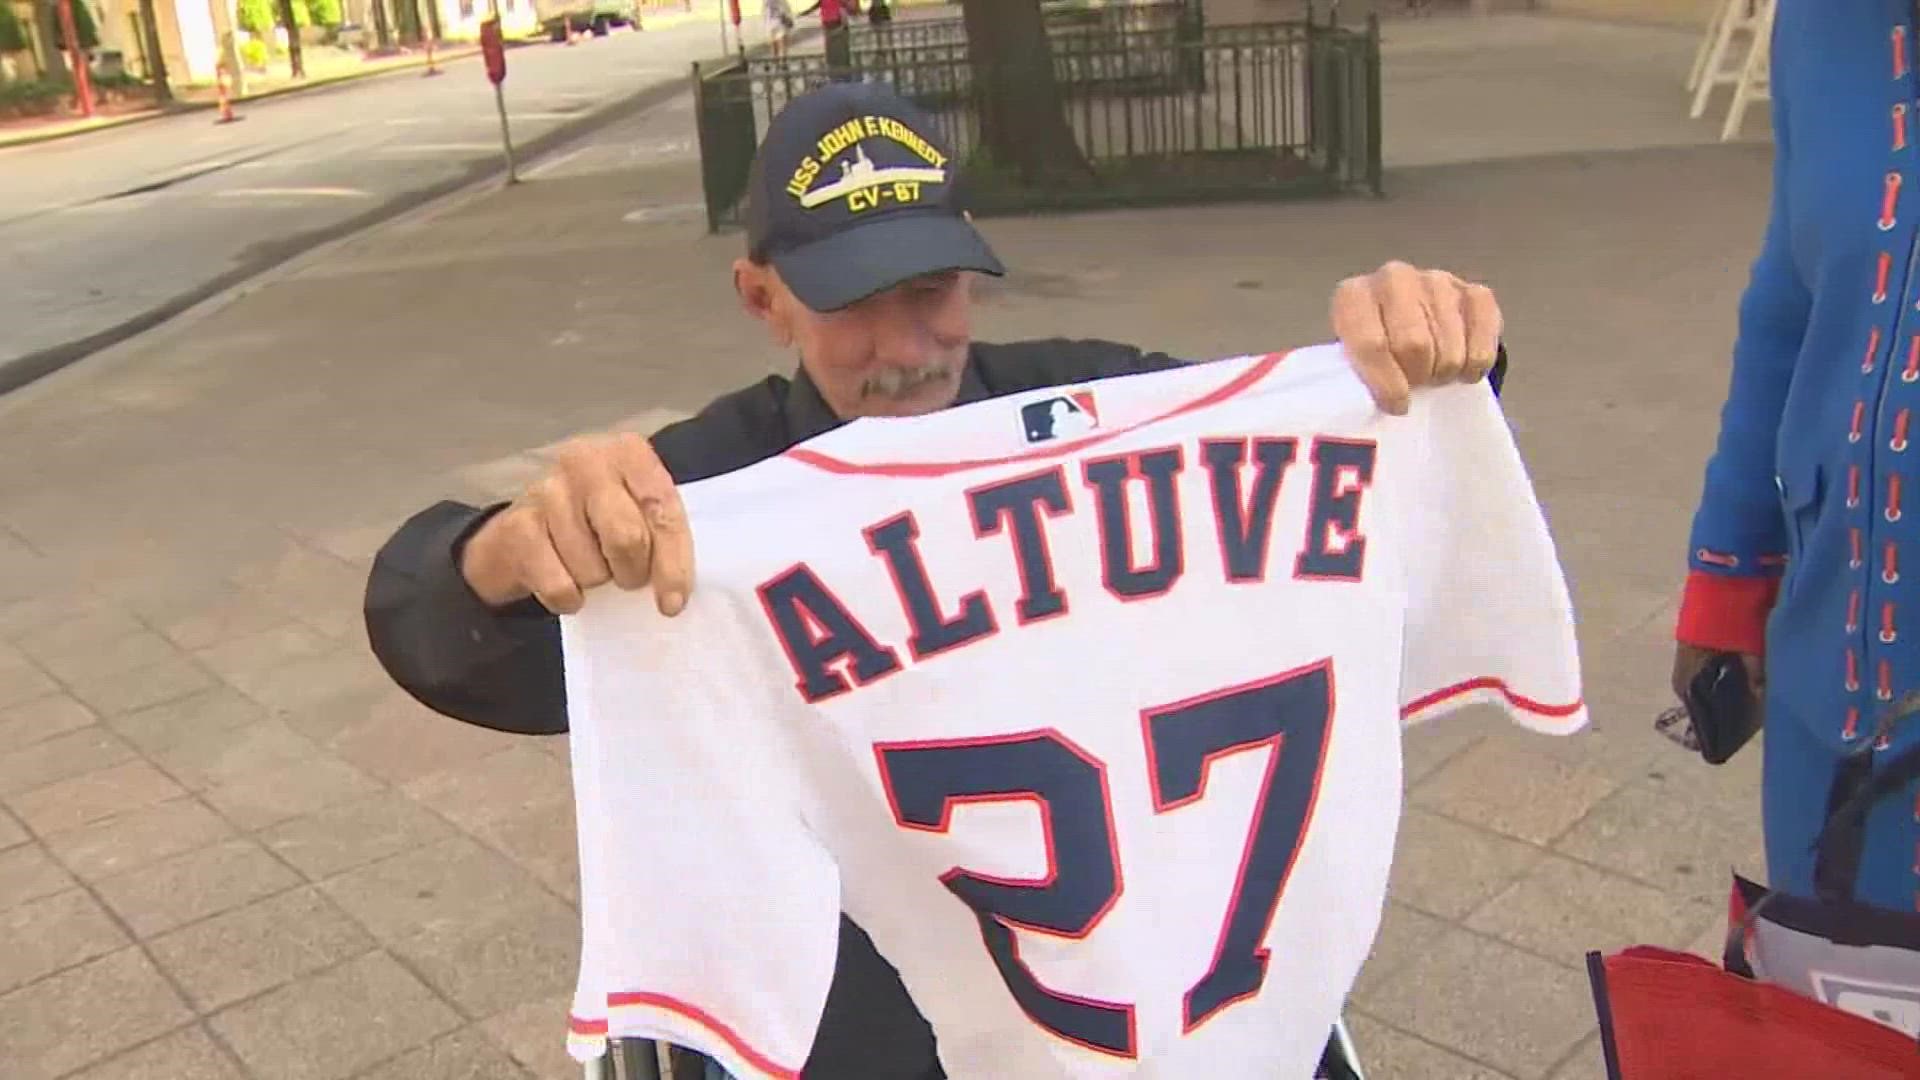 Robert O’Brien is a veteran who was once homeless. He recently was diagnosed with cancer so he's crossing things off his bucket list, like attending an Astros game.